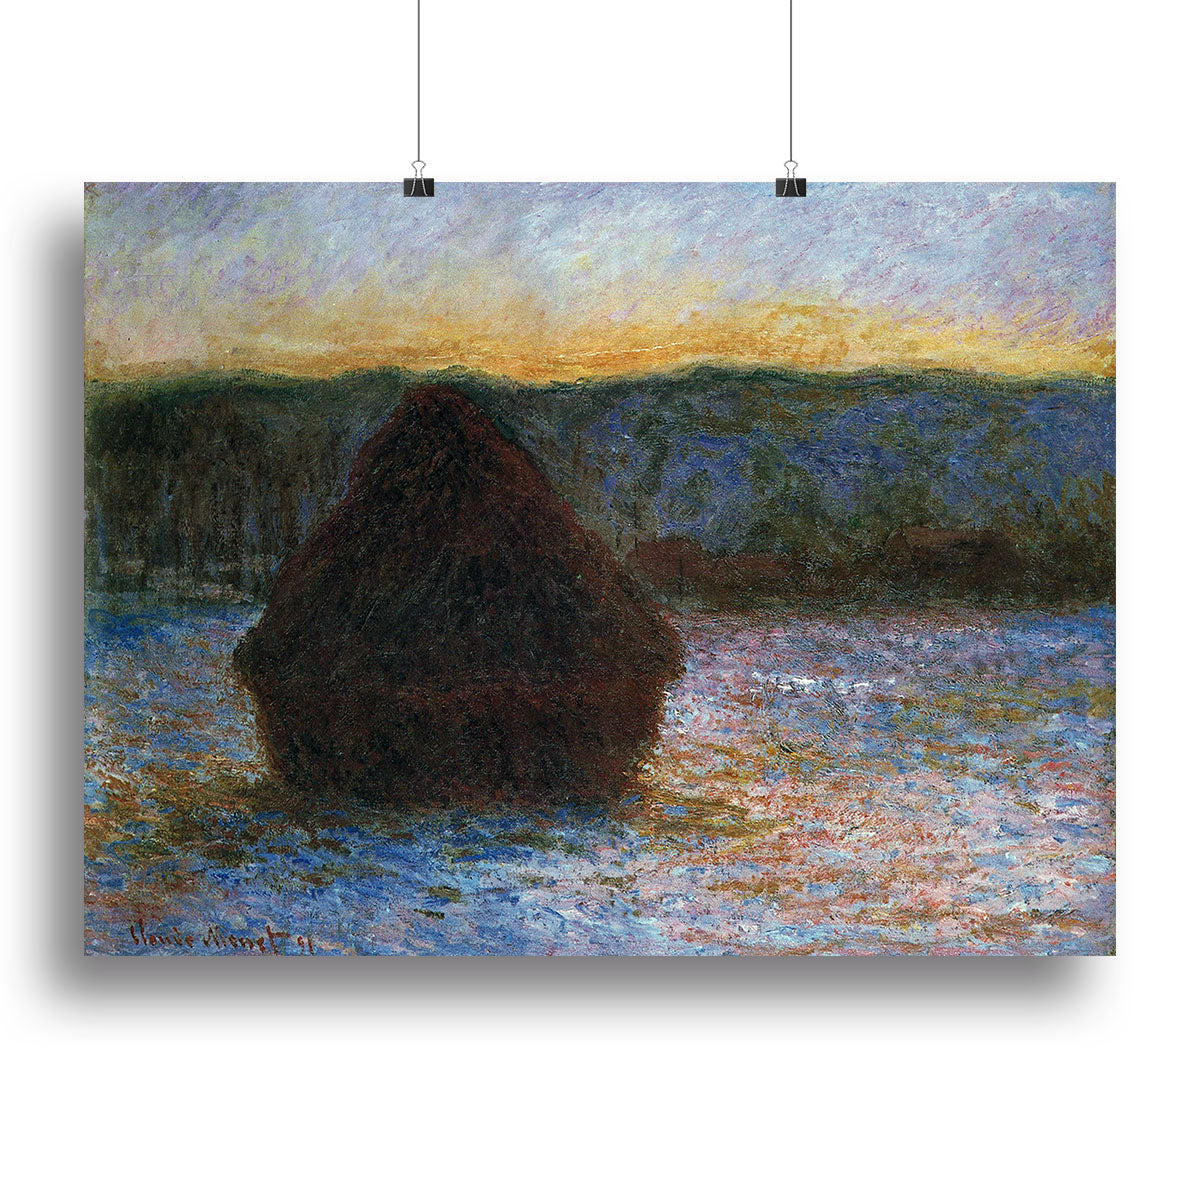 Haylofts thaw sunset by Monet Canvas Print or Poster - Canvas Art Rocks - 2